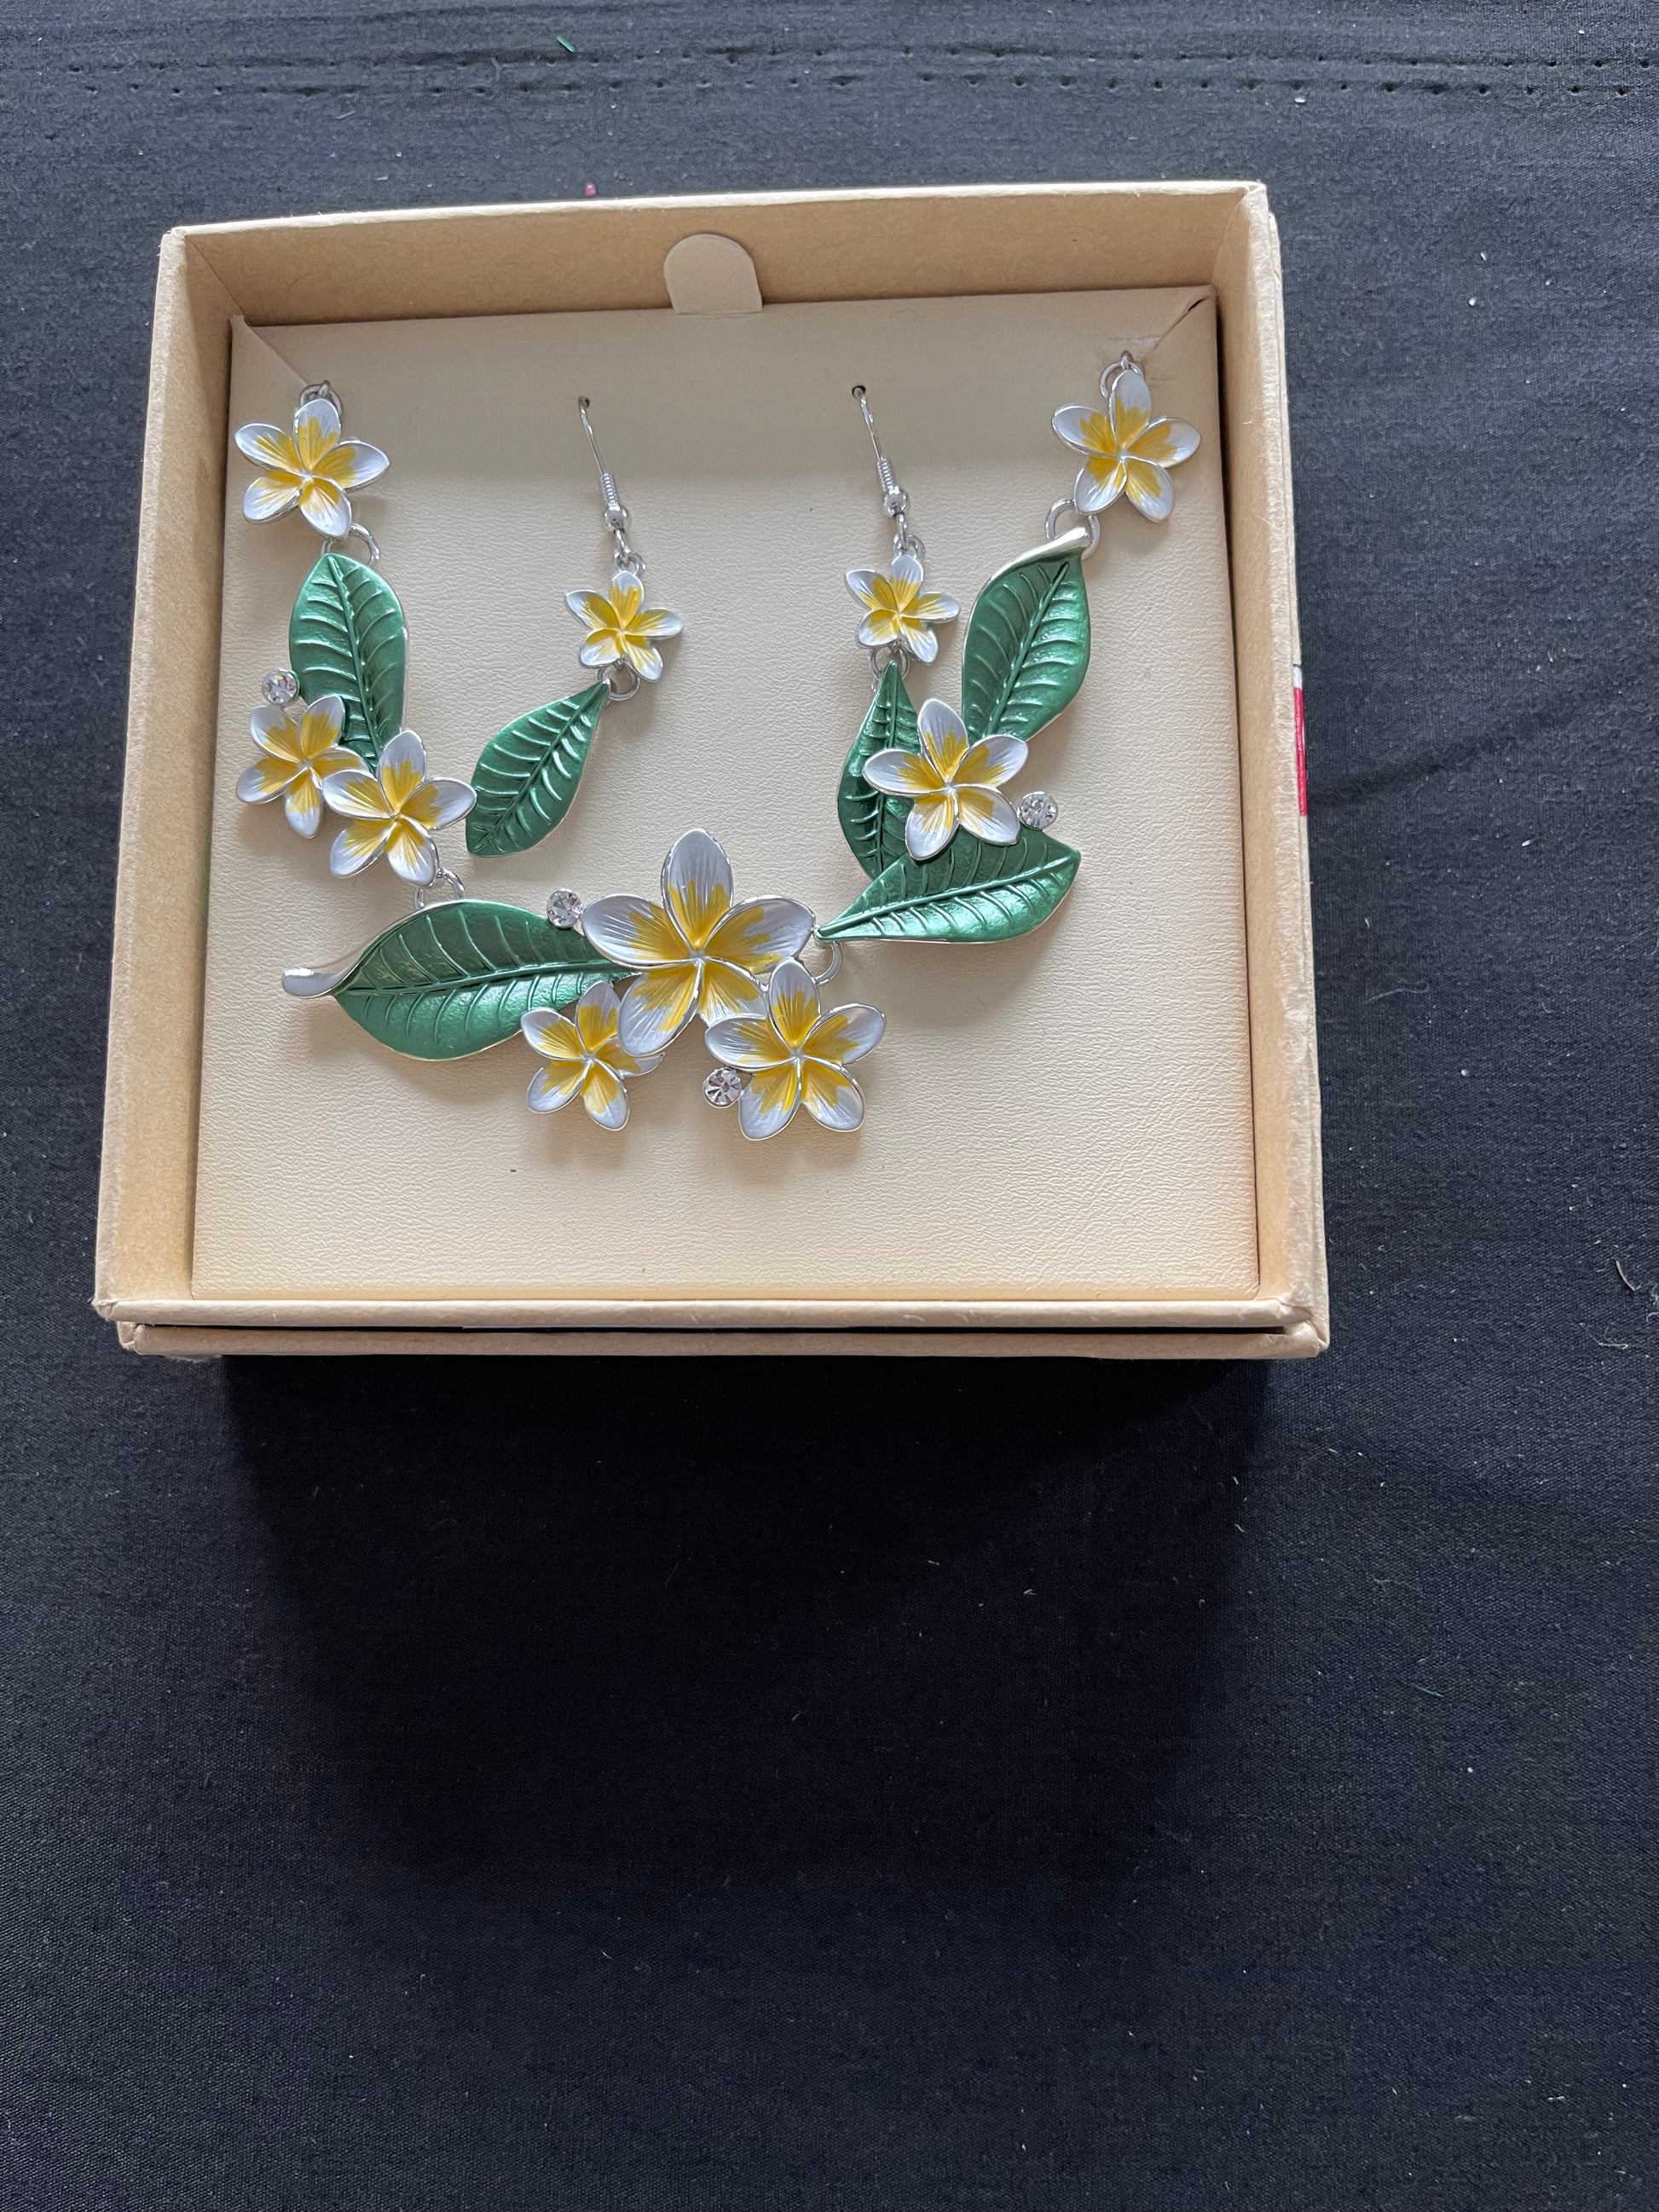 Yellow Frangipani Necklace and Earrings